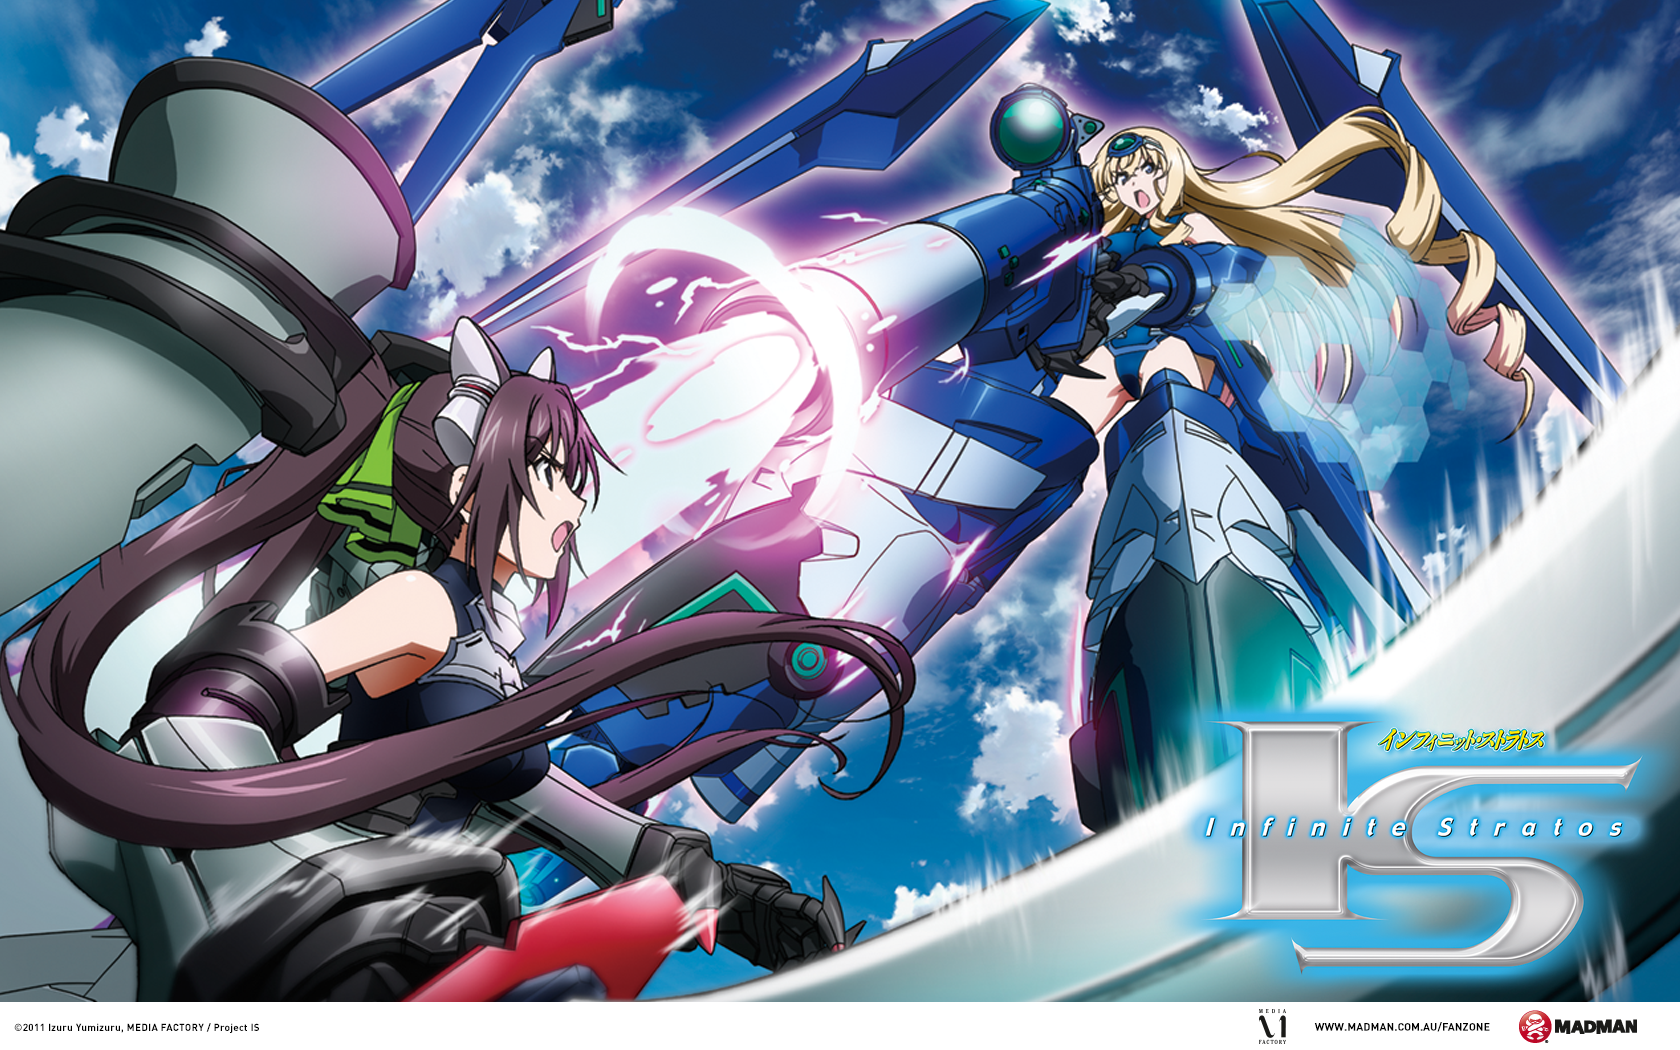 The battle in the anime Vast Skies wallpaper and image